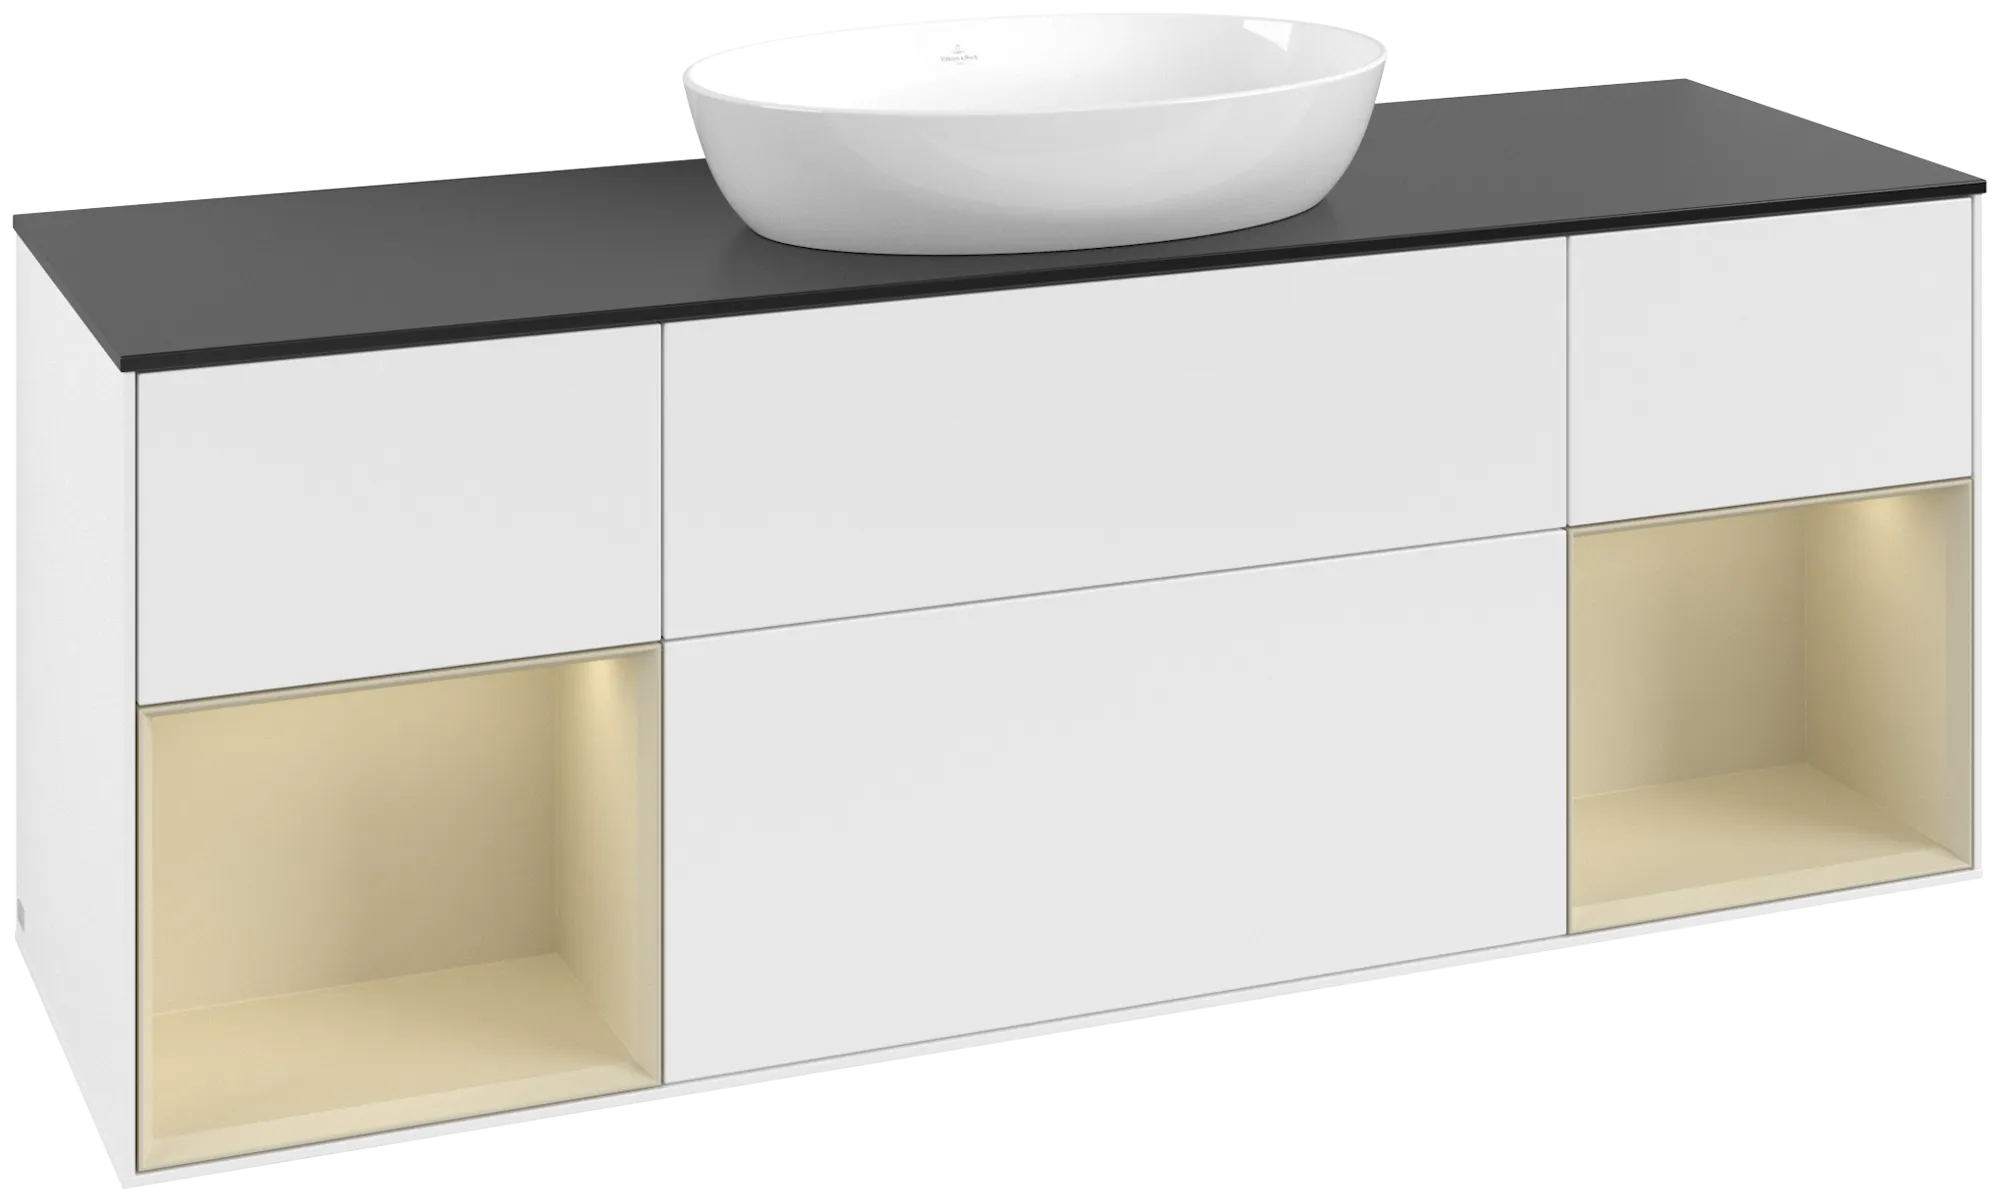 Picture of VILLEROY BOCH Finion Vanity unit, with lighting, 4 pull-out compartments, 1600 x 603 x 501 mm, White Matt Lacquer / Silk Grey Matt Lacquer / Glass Black Matt #GD02HJMT